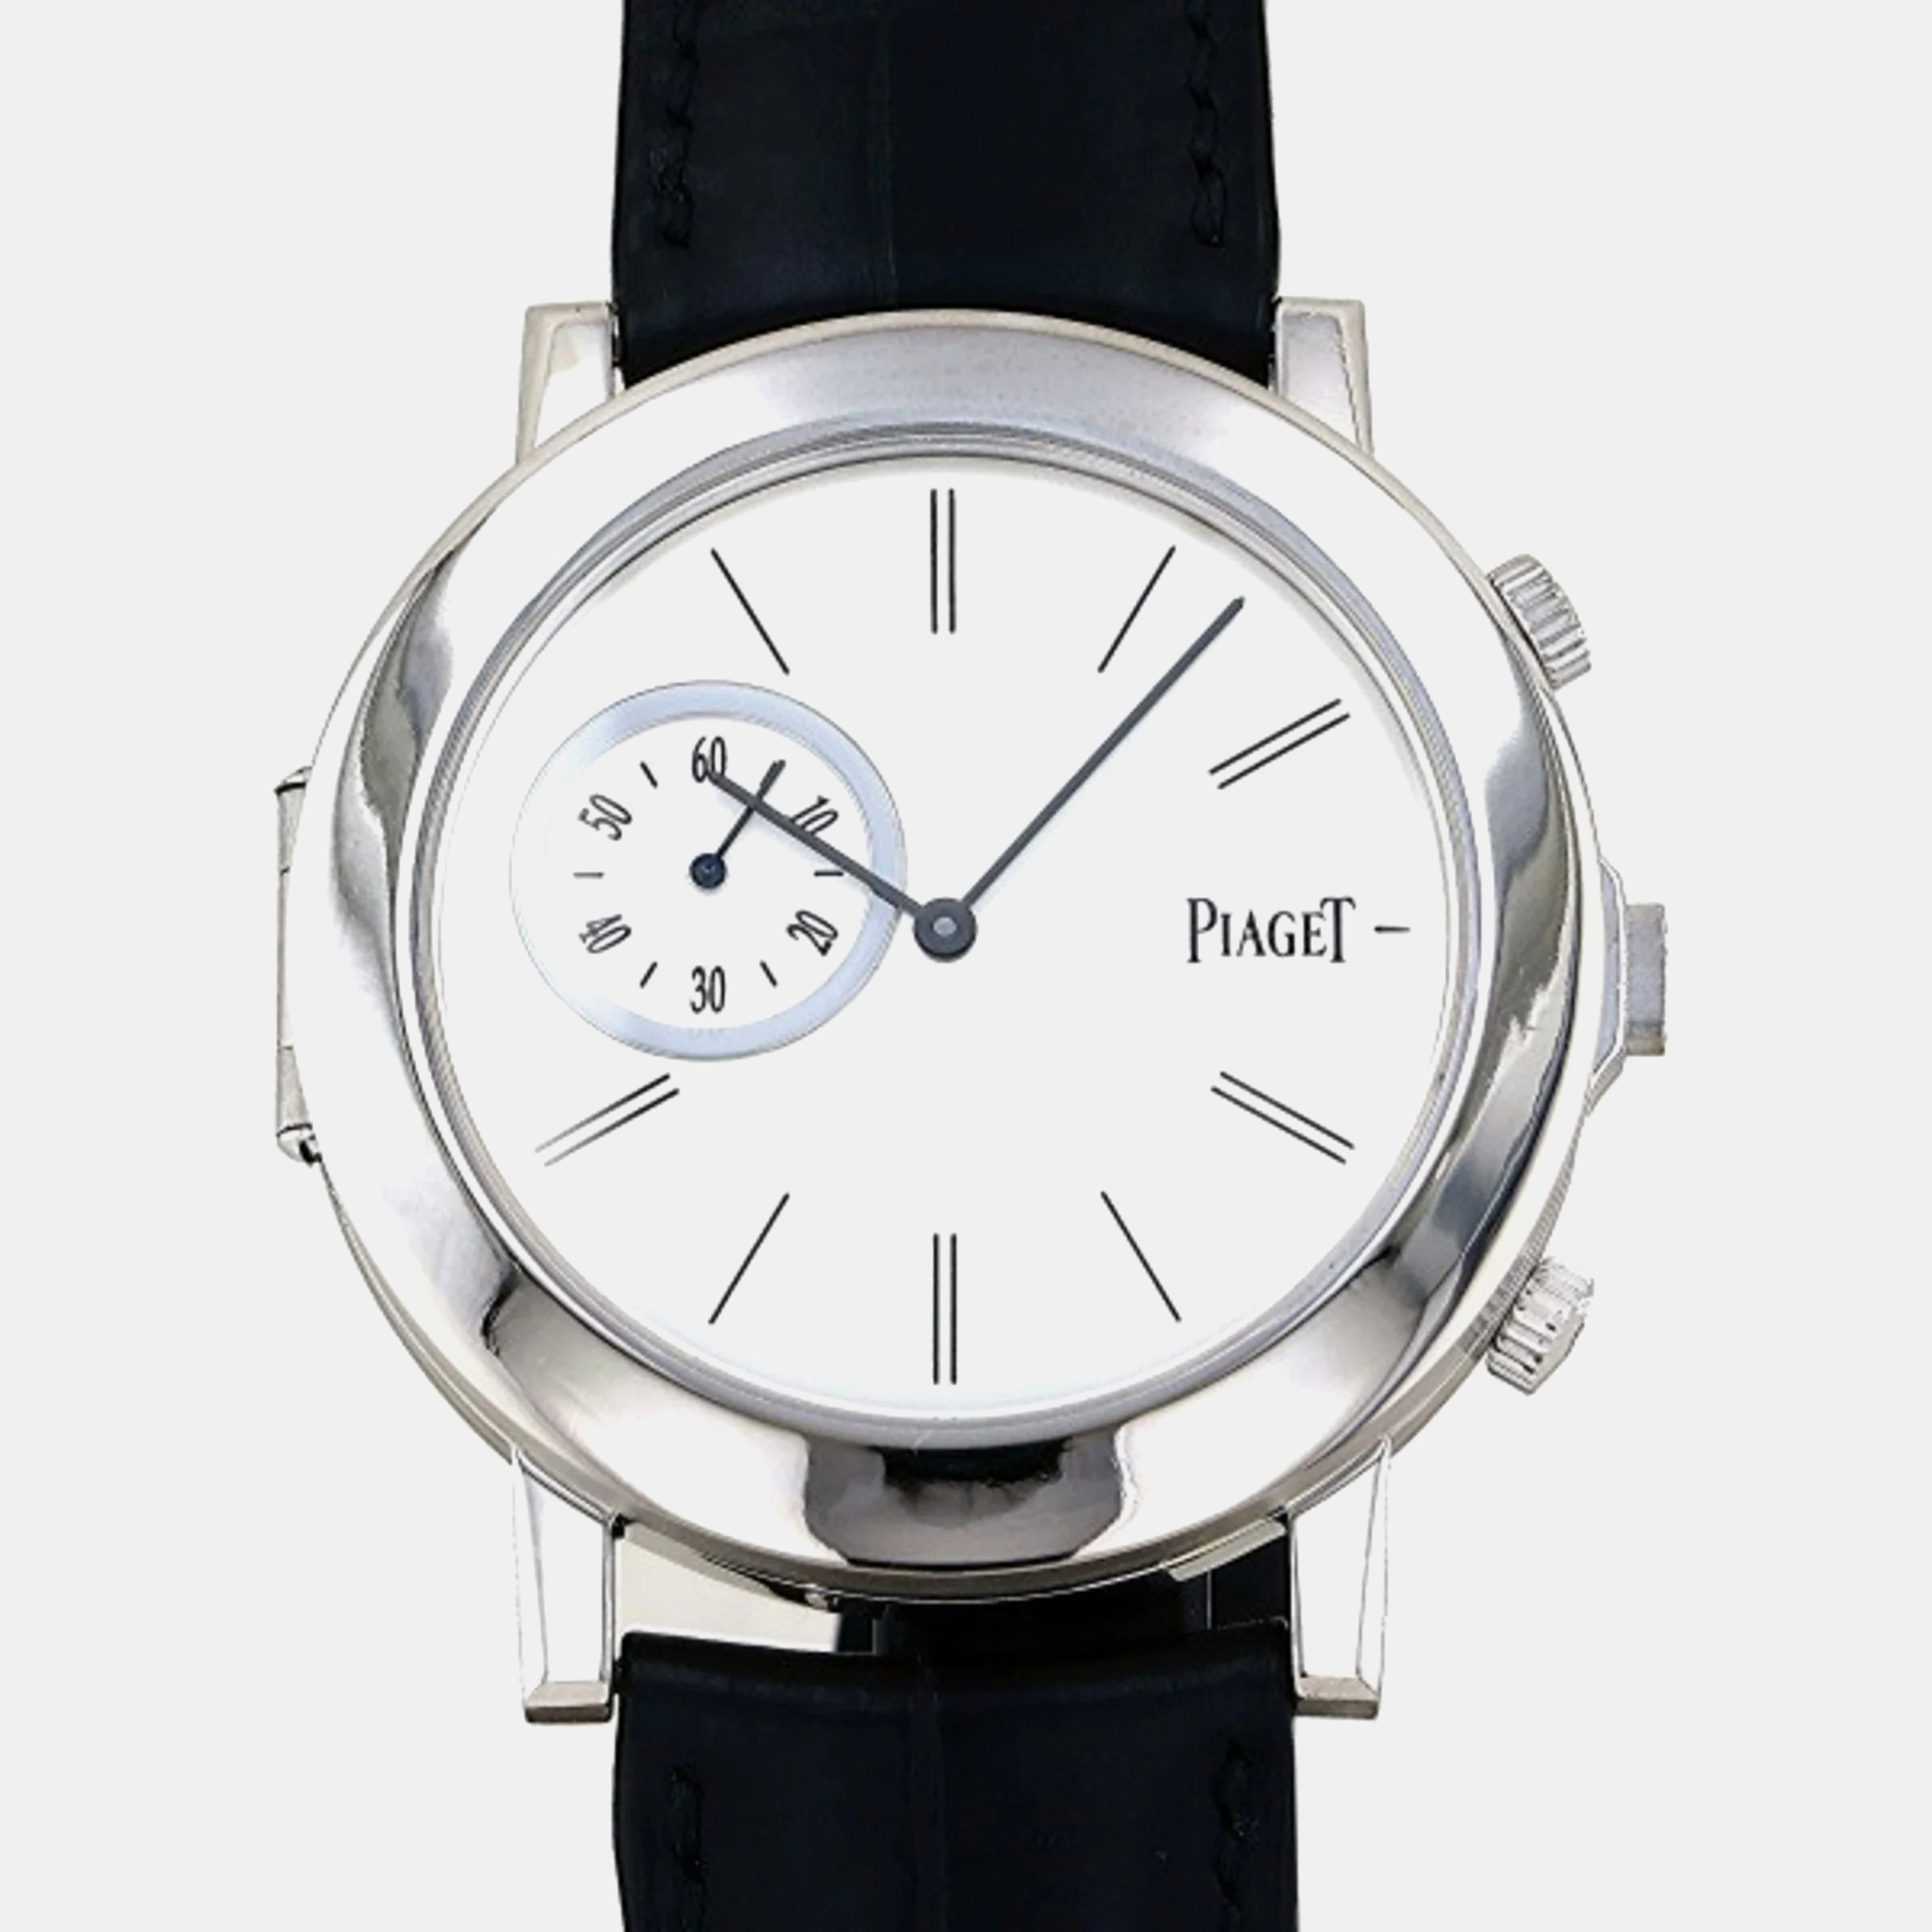 Pre-owned Piaget Silver 18k White Gold Altiplano Goa35152 Manual Winding Men's Wristwatch 43 Mm